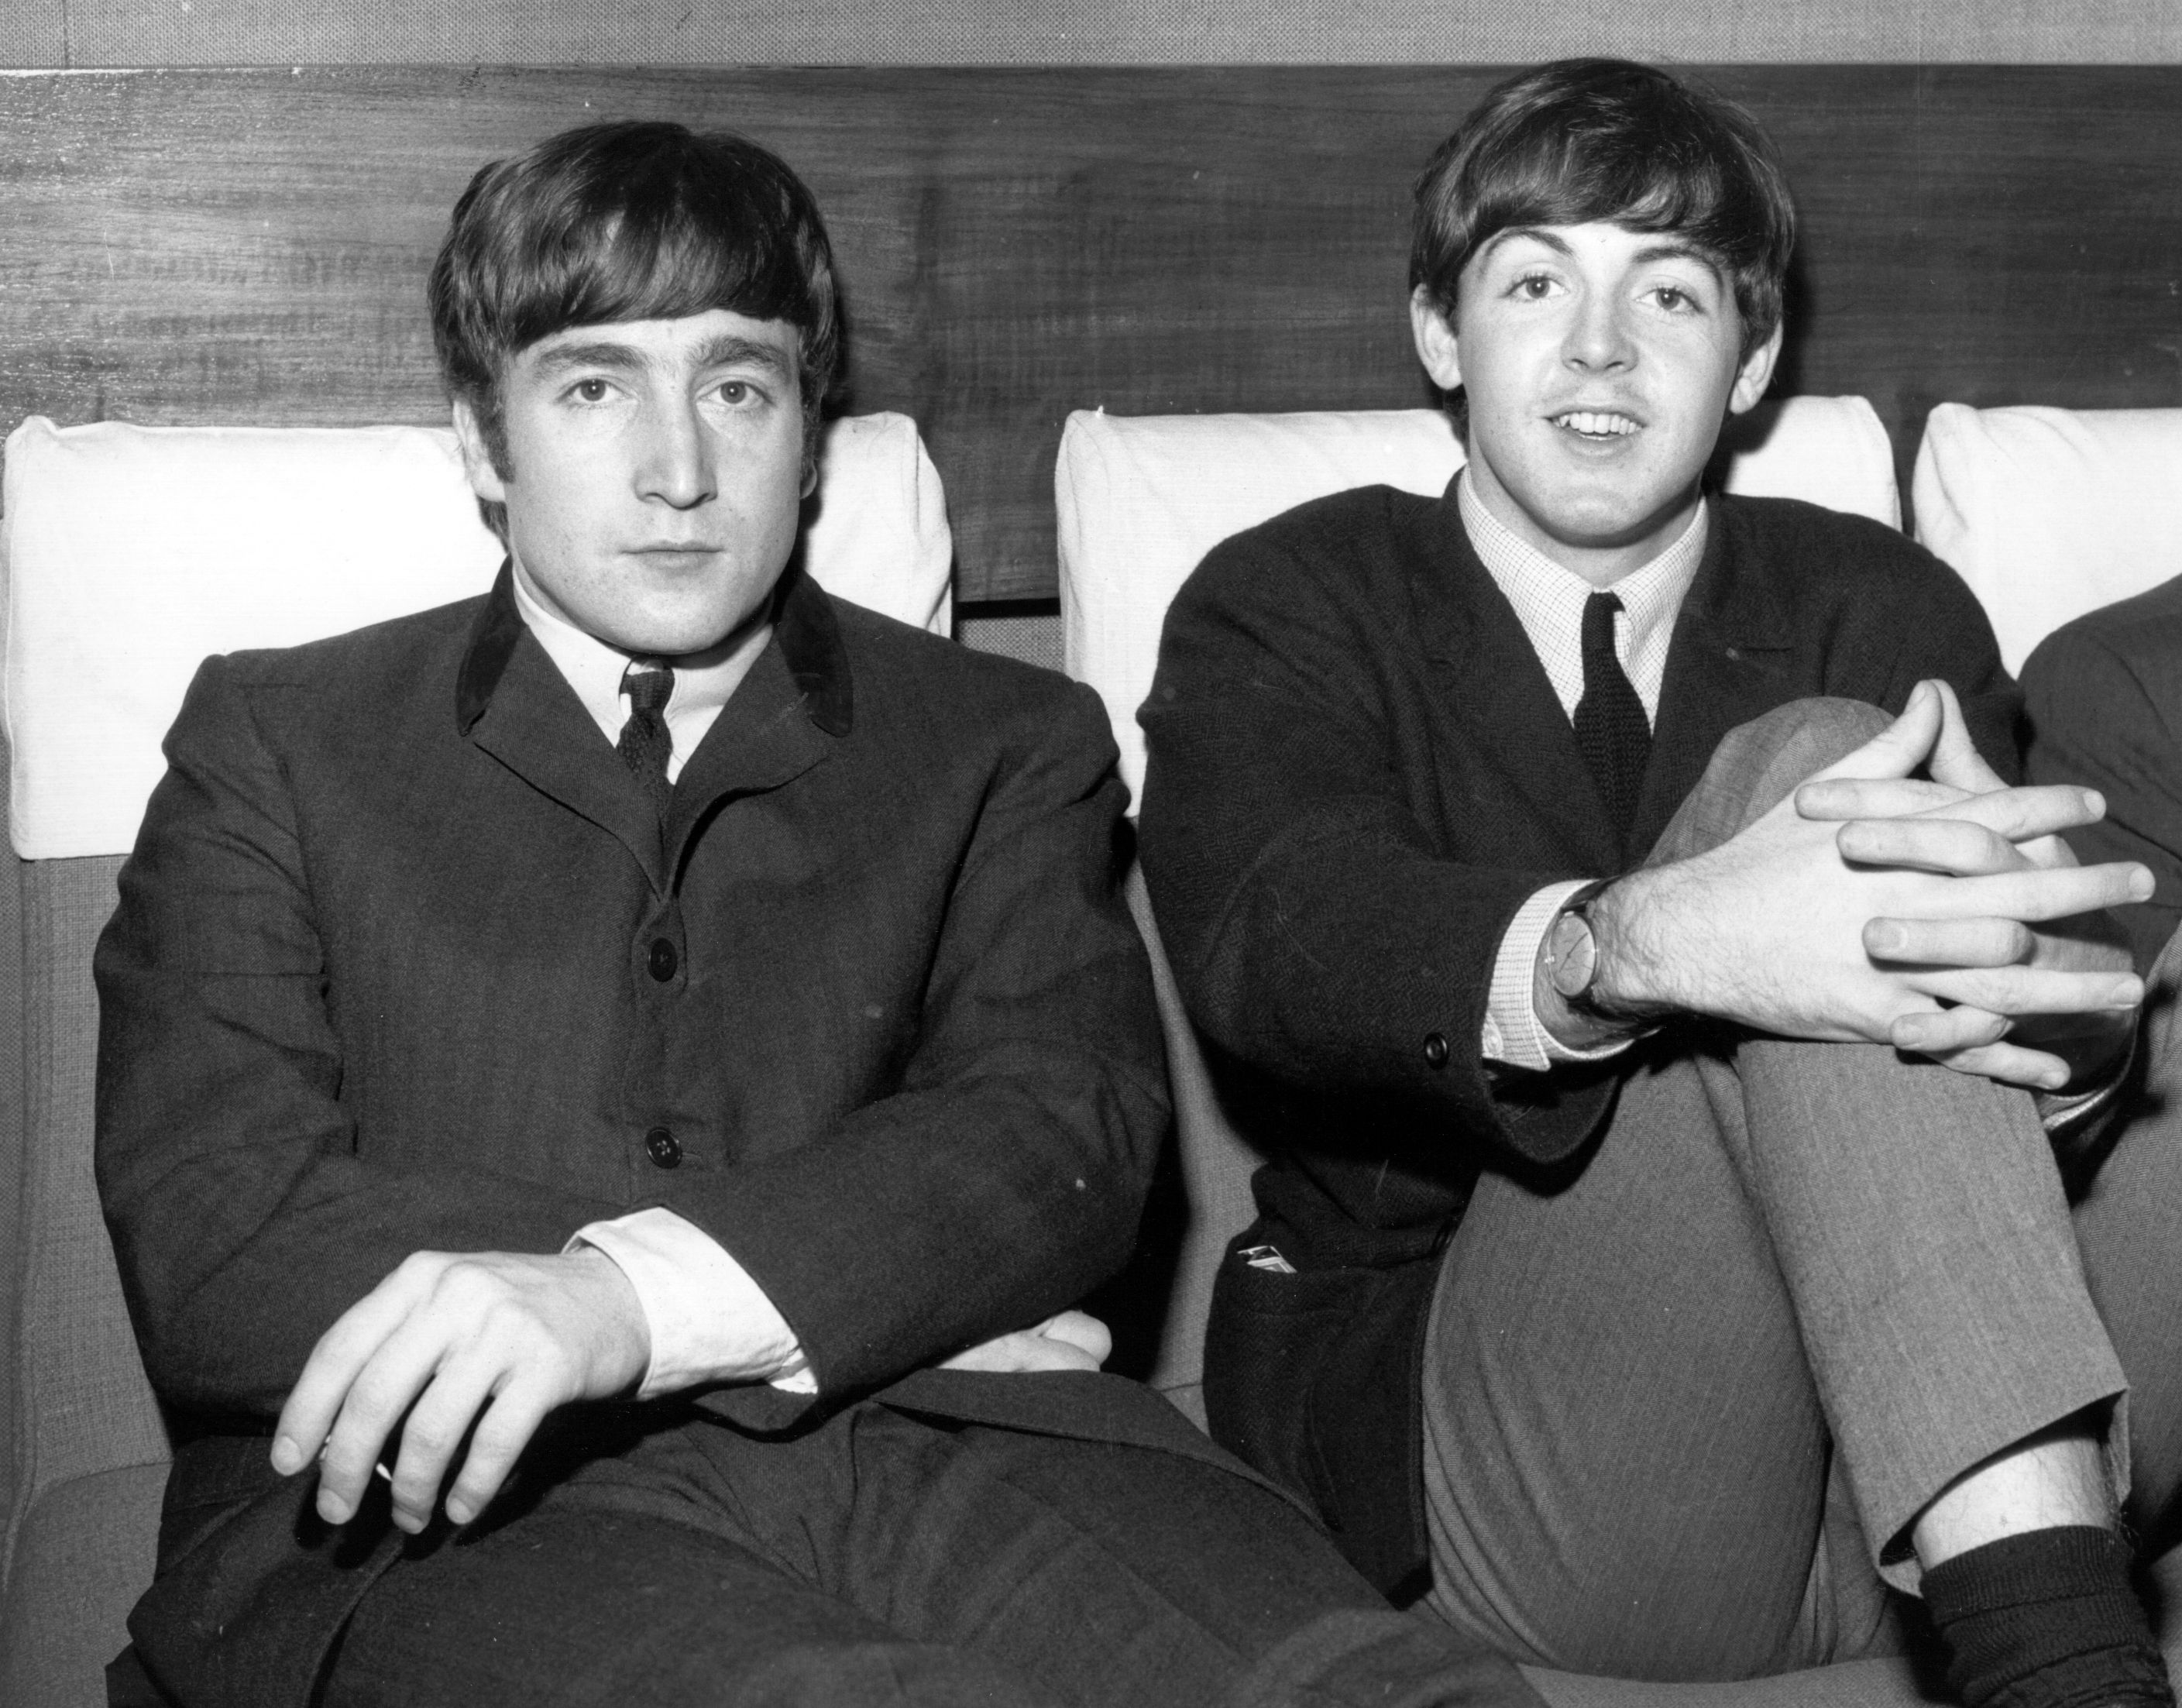 The Beatles' John Lennon and Paul McCartney sitting next to each other